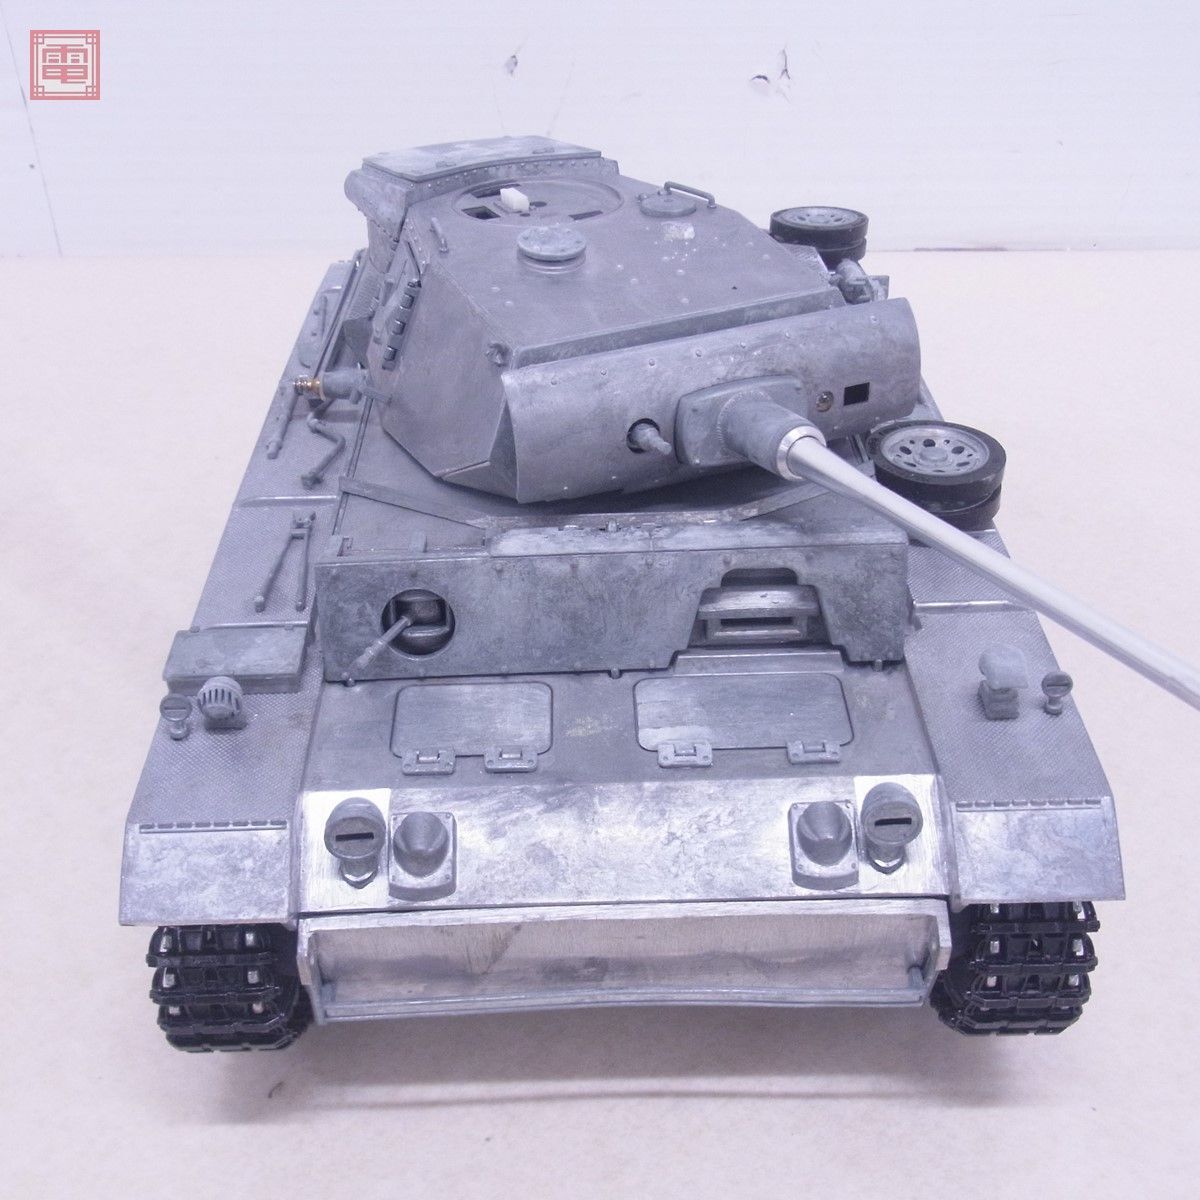 MATO 1/16 3 number L type tank full metal case Propo attaching electric RC radio-controller operation not yet verification present condition goods [40